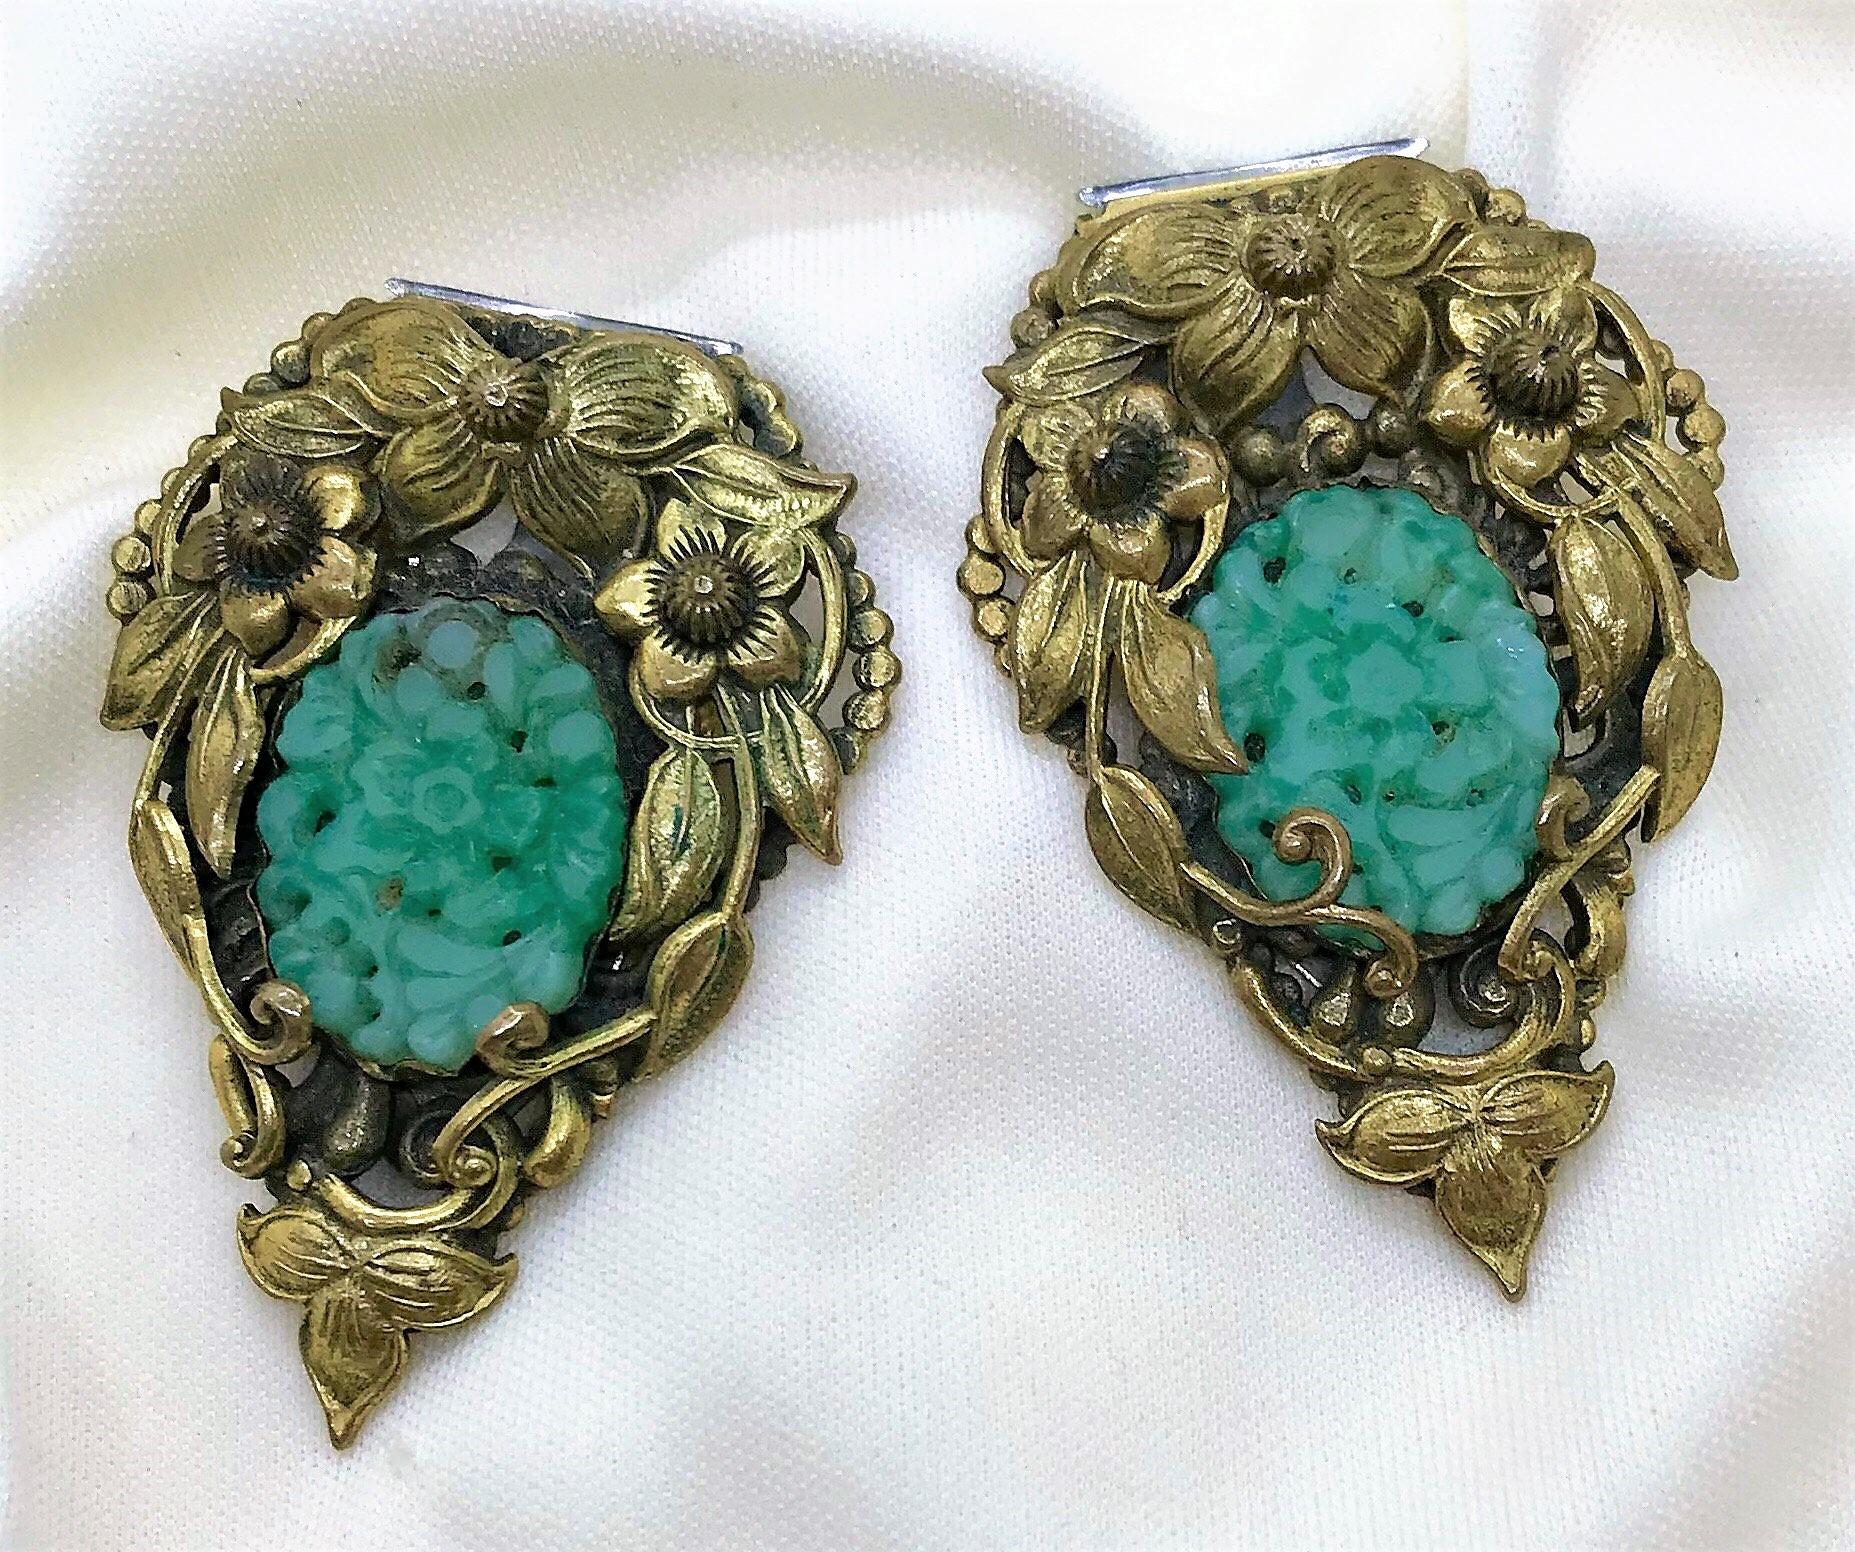 Circa late 1920s to early 1930s pair of plated brass dress clips done in an ornate, floral motif and set with molded jade green glass ovals.  Each dress clip measures 2.1